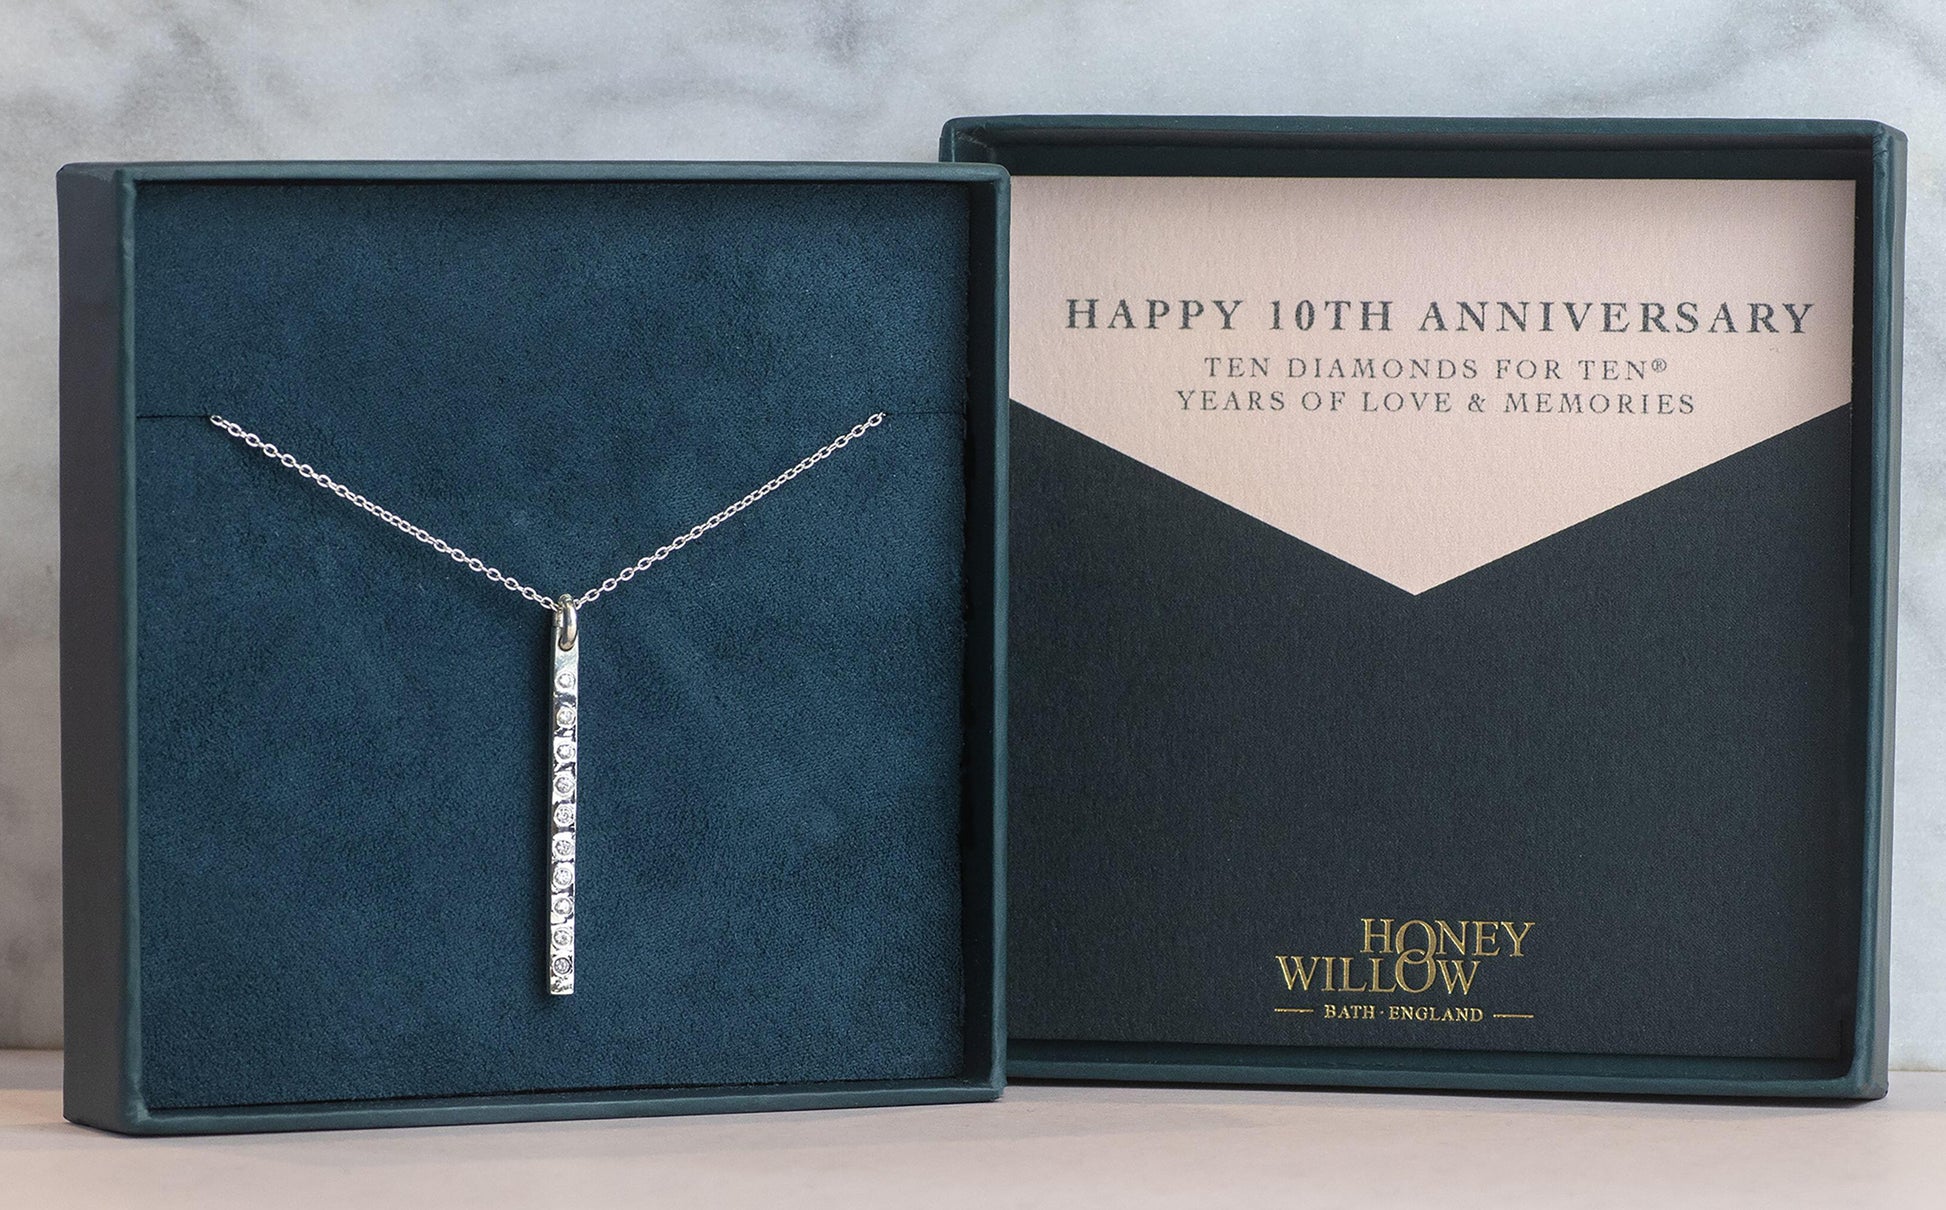 10th Anniversary Necklace Silver - 10 Diamonds for 10® Years